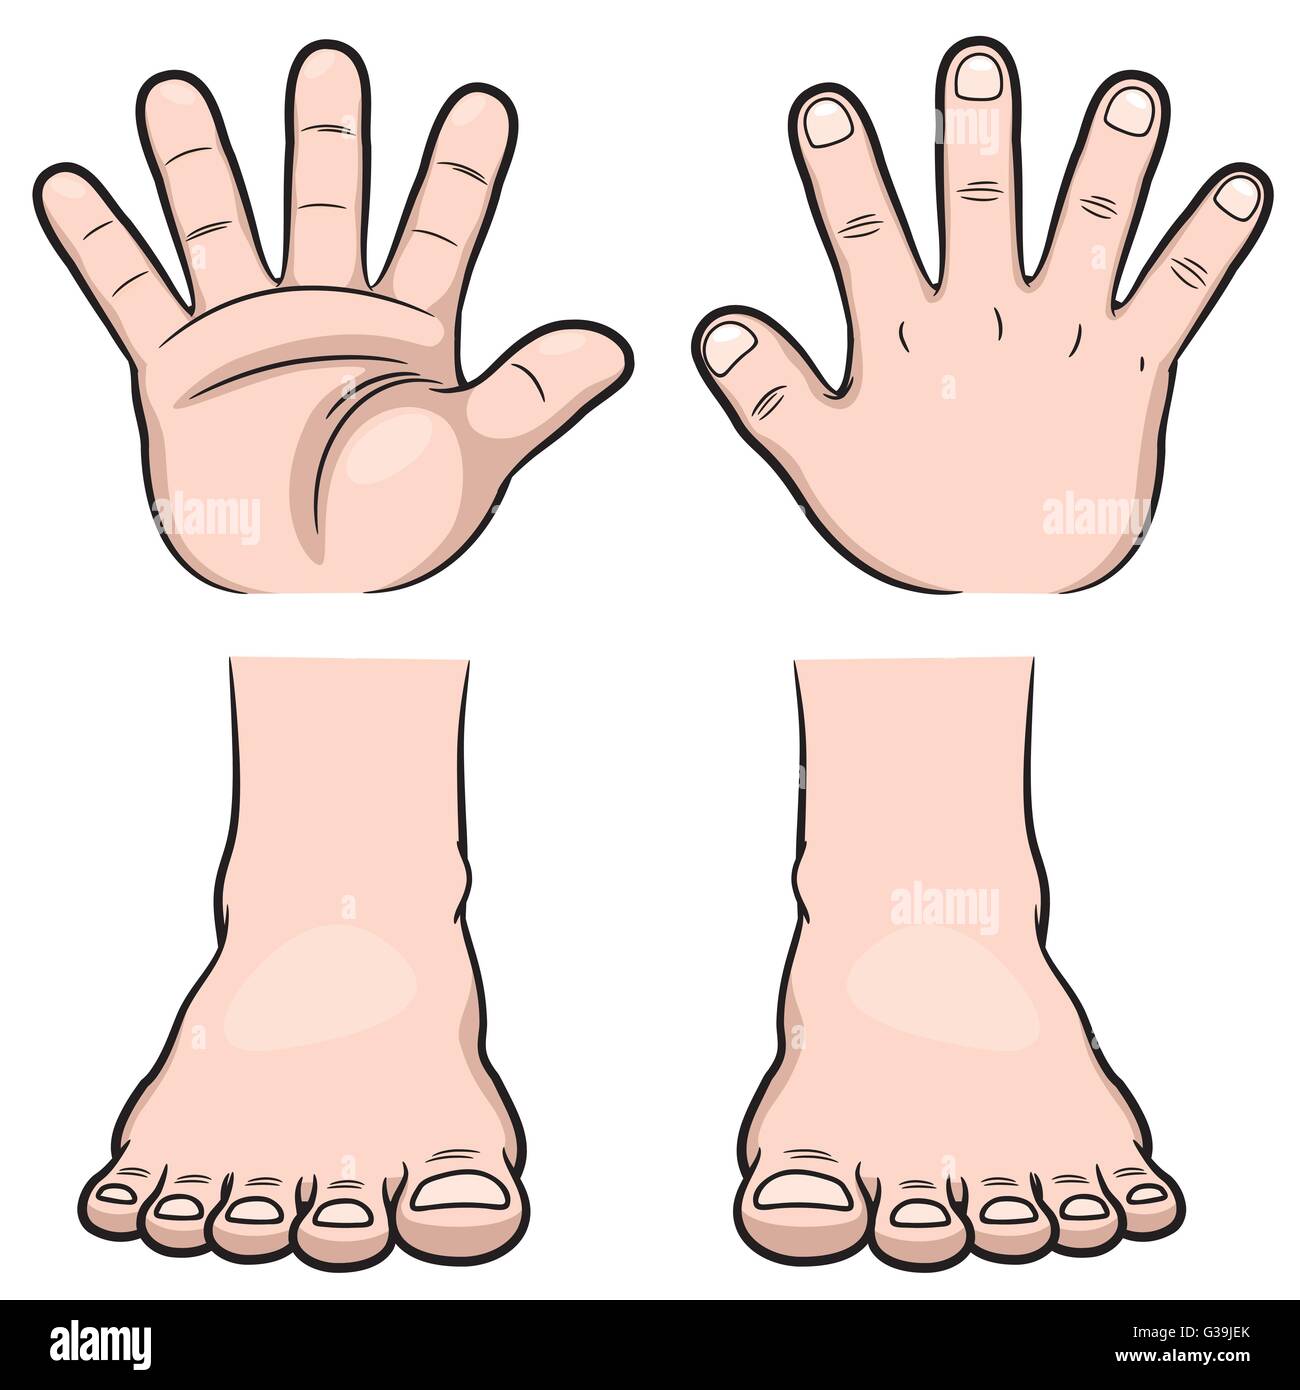 Vector illustration of hands and feet Stock Vector